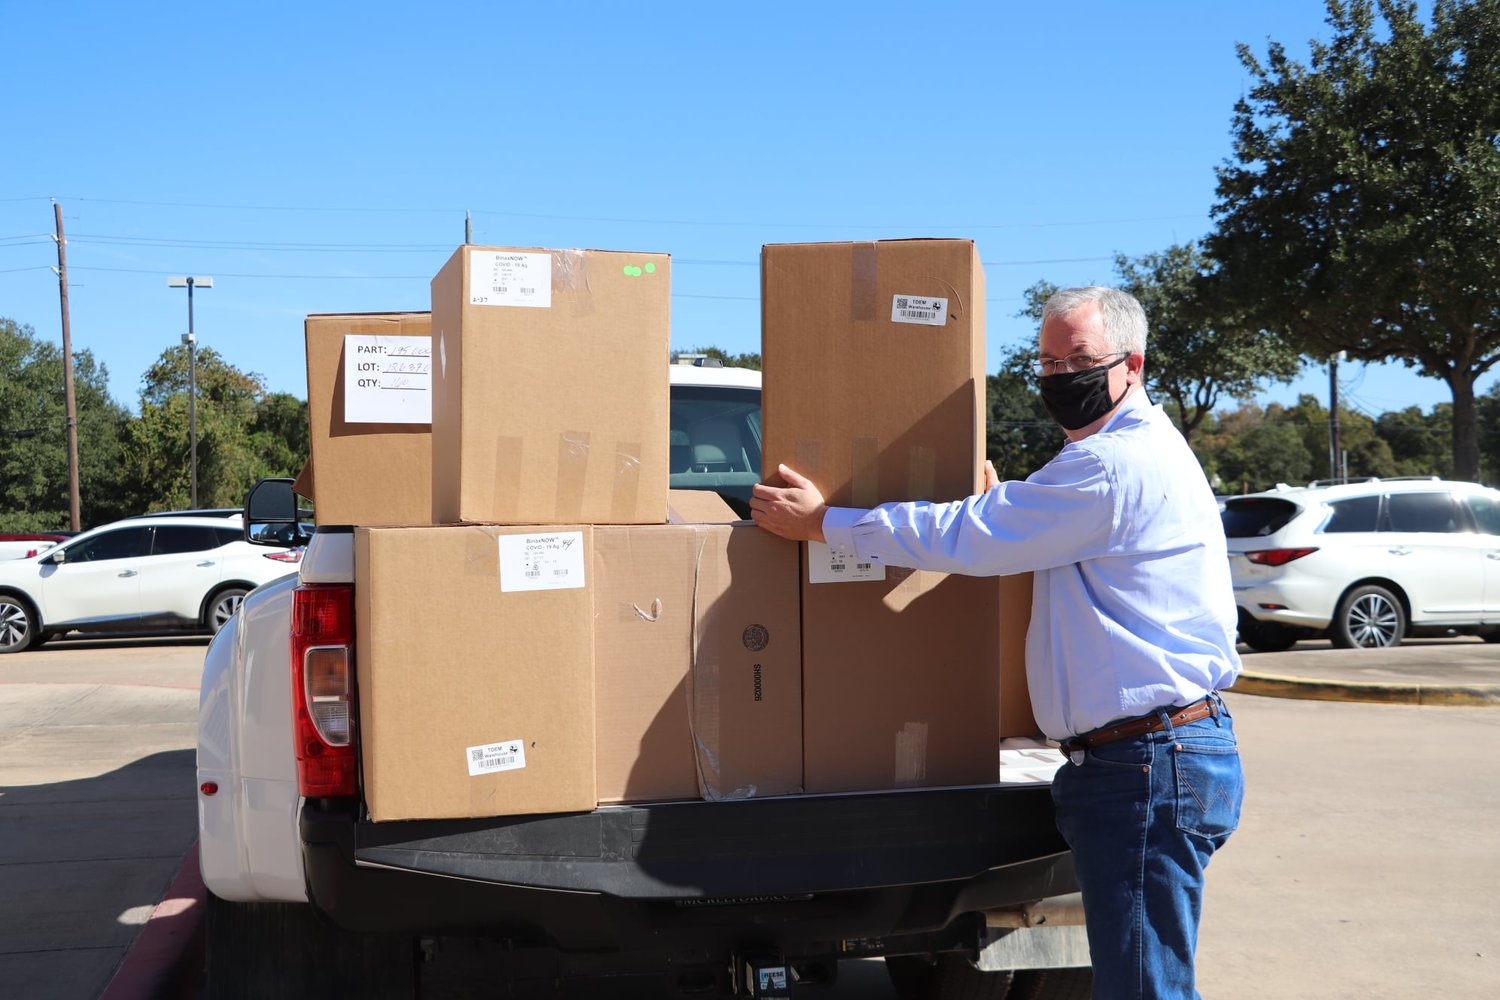 Katy ISD staff unload COVID-19 testing supplies Nov. 4 after receiving testing kits and related equipment from the Texas Education Agency. Free testing is now available for all KISD students at the district’s Young Agricultural Sciences Center on Katy Hockley Cut Off Road.